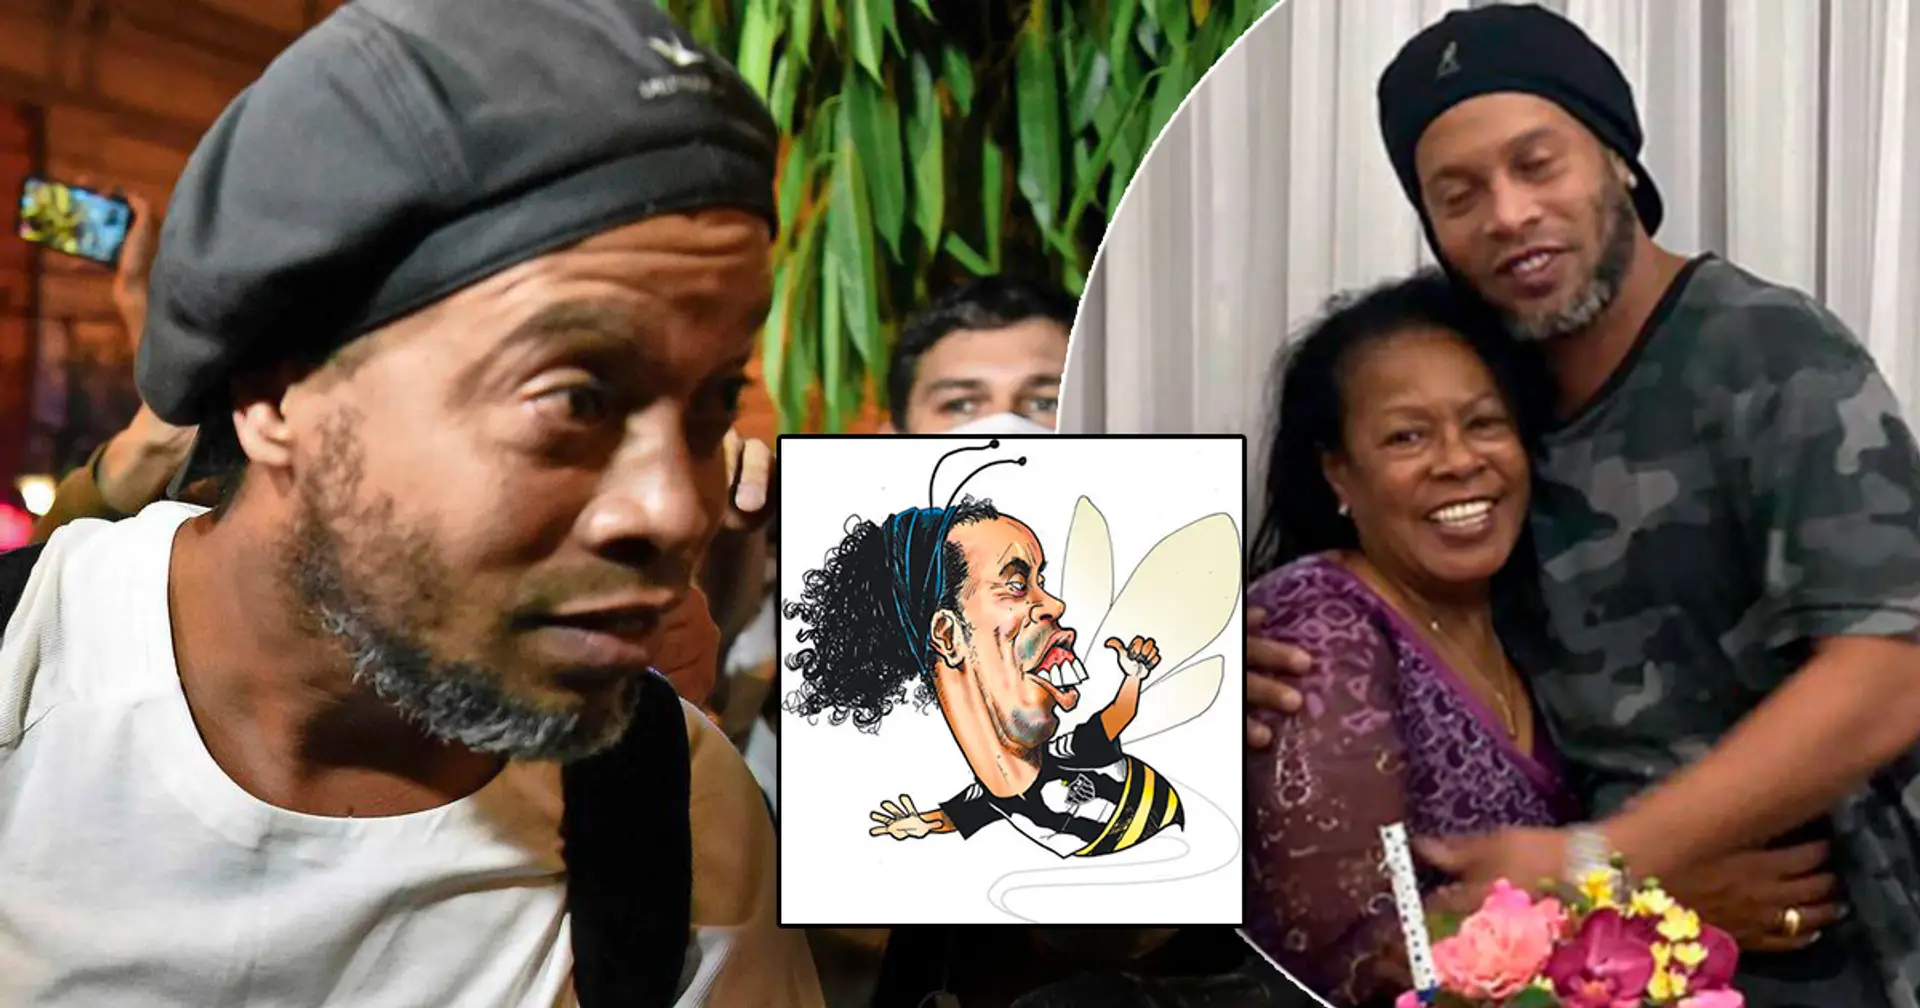 Ronaldinho has a bees species with number 49 named after him in Brazil - even he can't believe it!